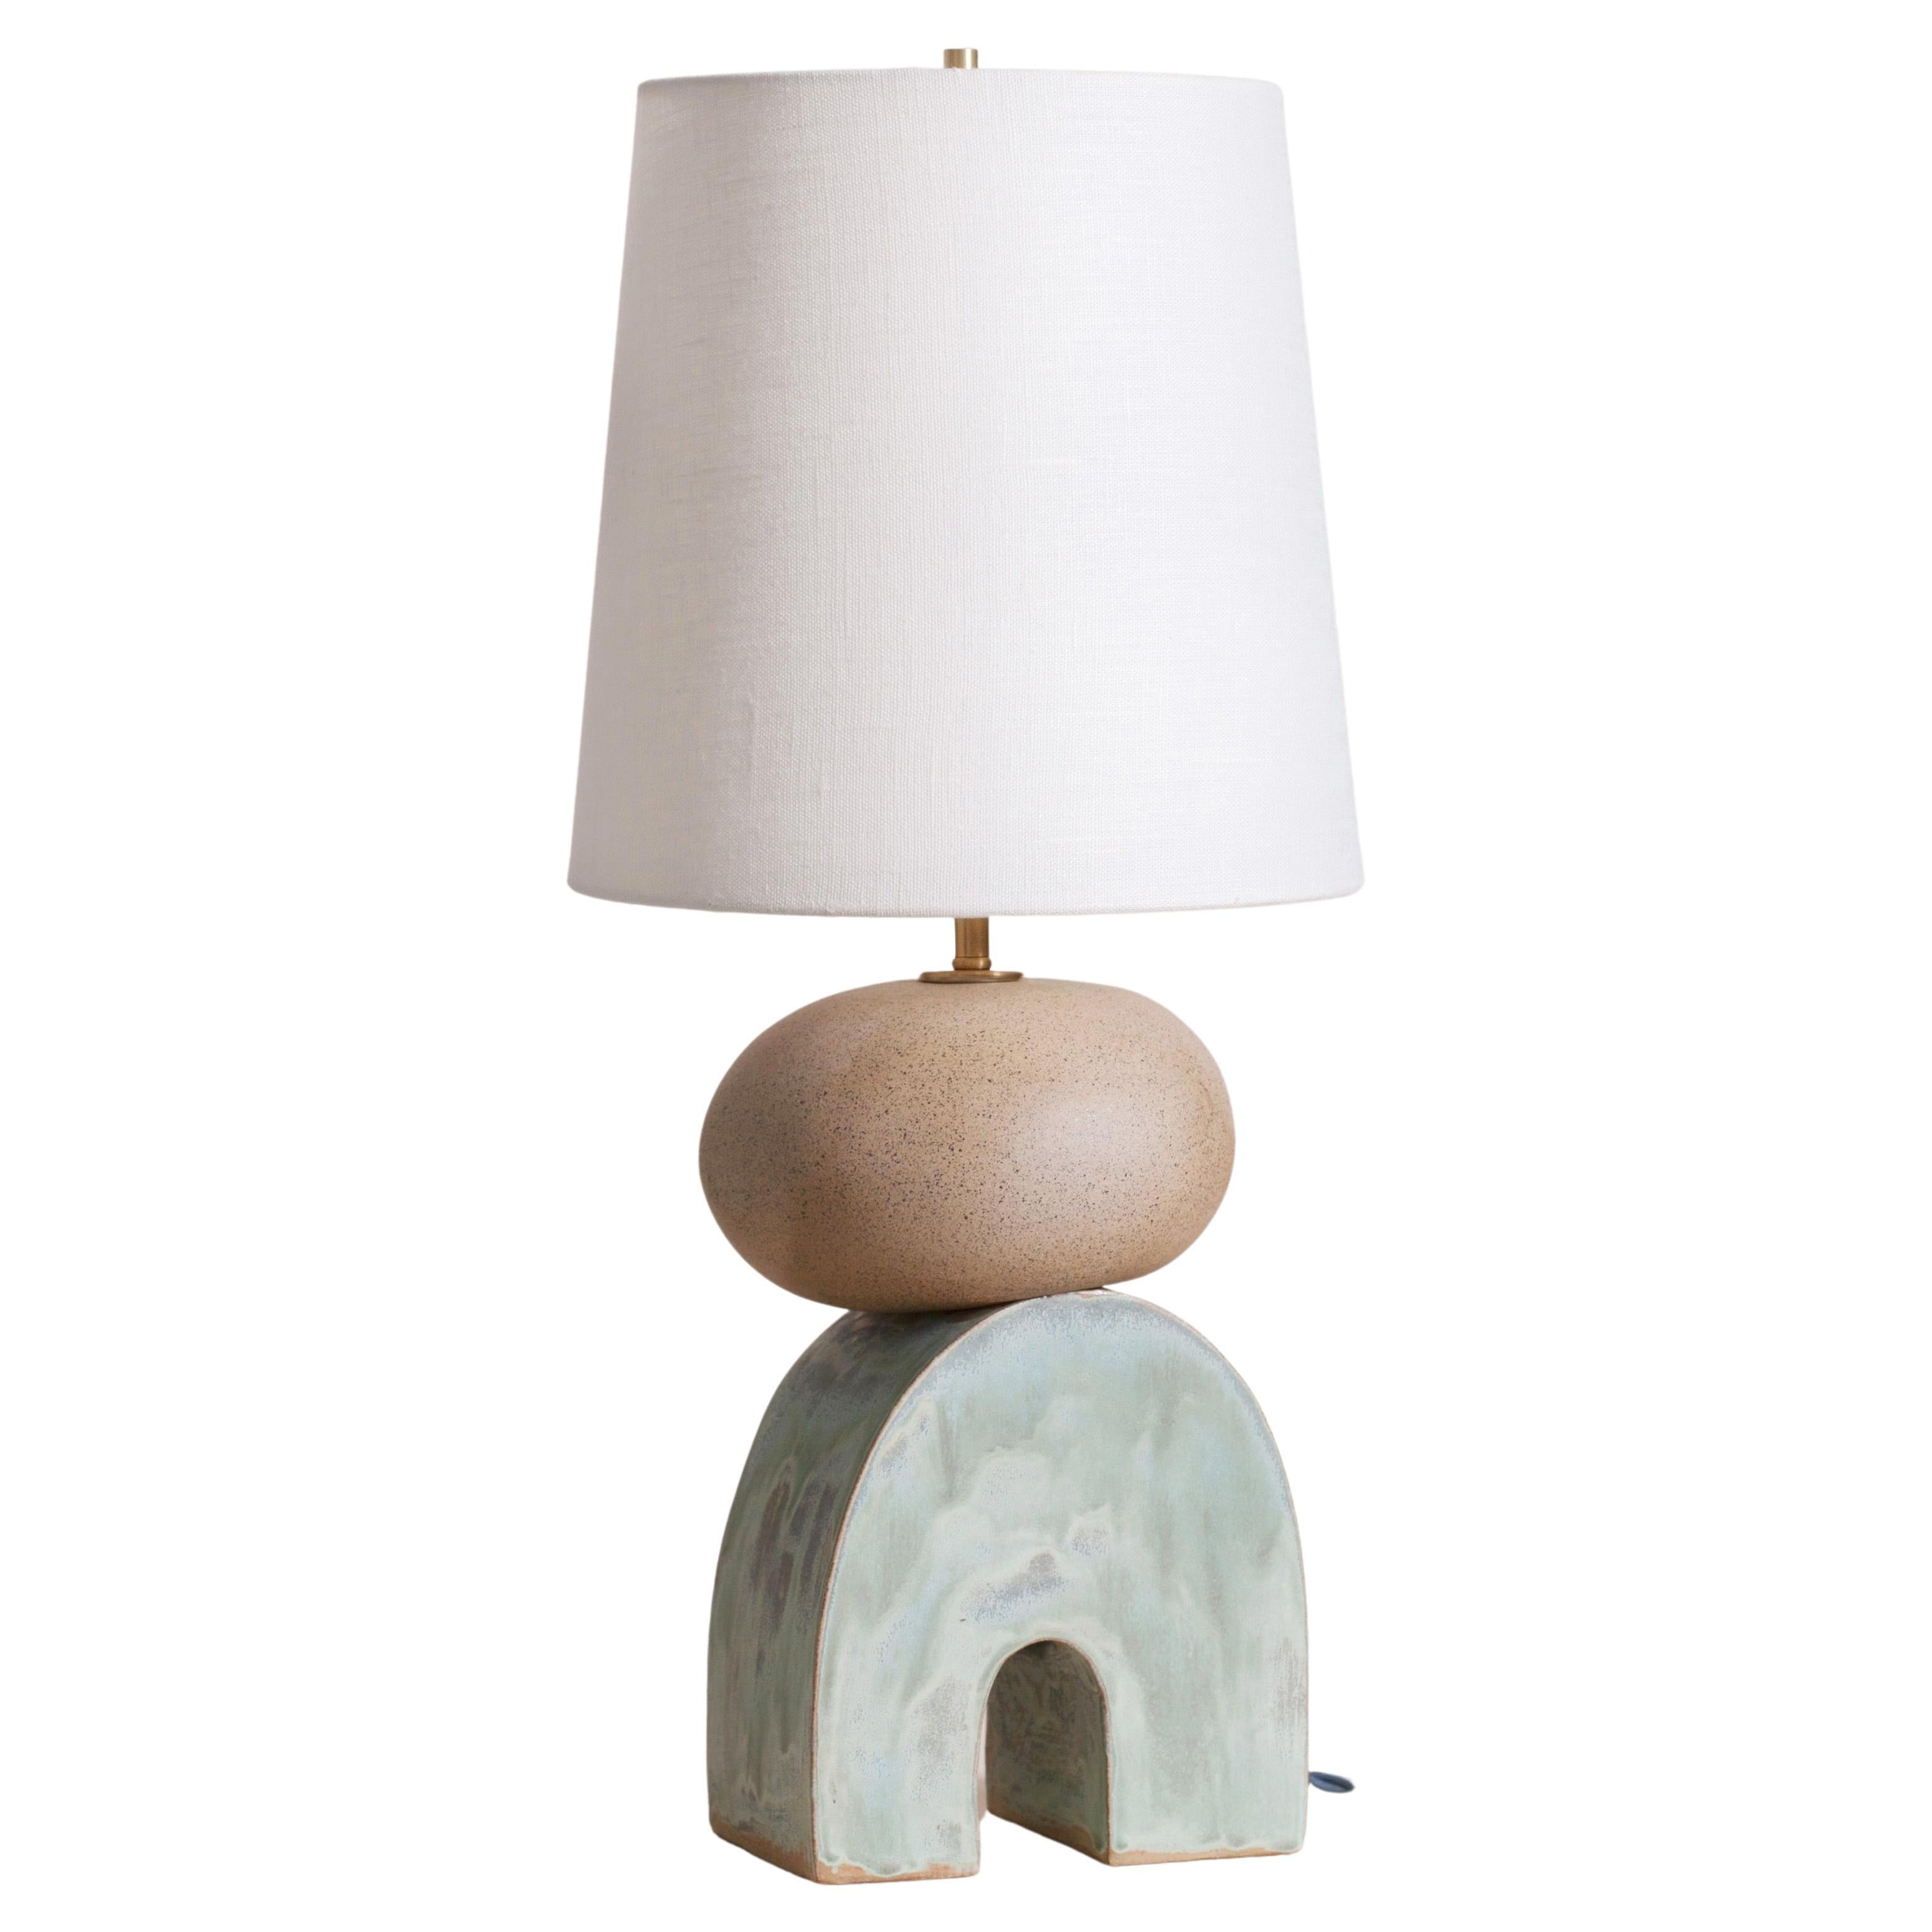 Pair of one of a kind ceramic lamps, thrown on the potters wheel and assembled by hand. The lamp base is comprised of two different clay bodies and features a raw, unglazed ceramic surface to highlight the texture of natural clay contrasted with a